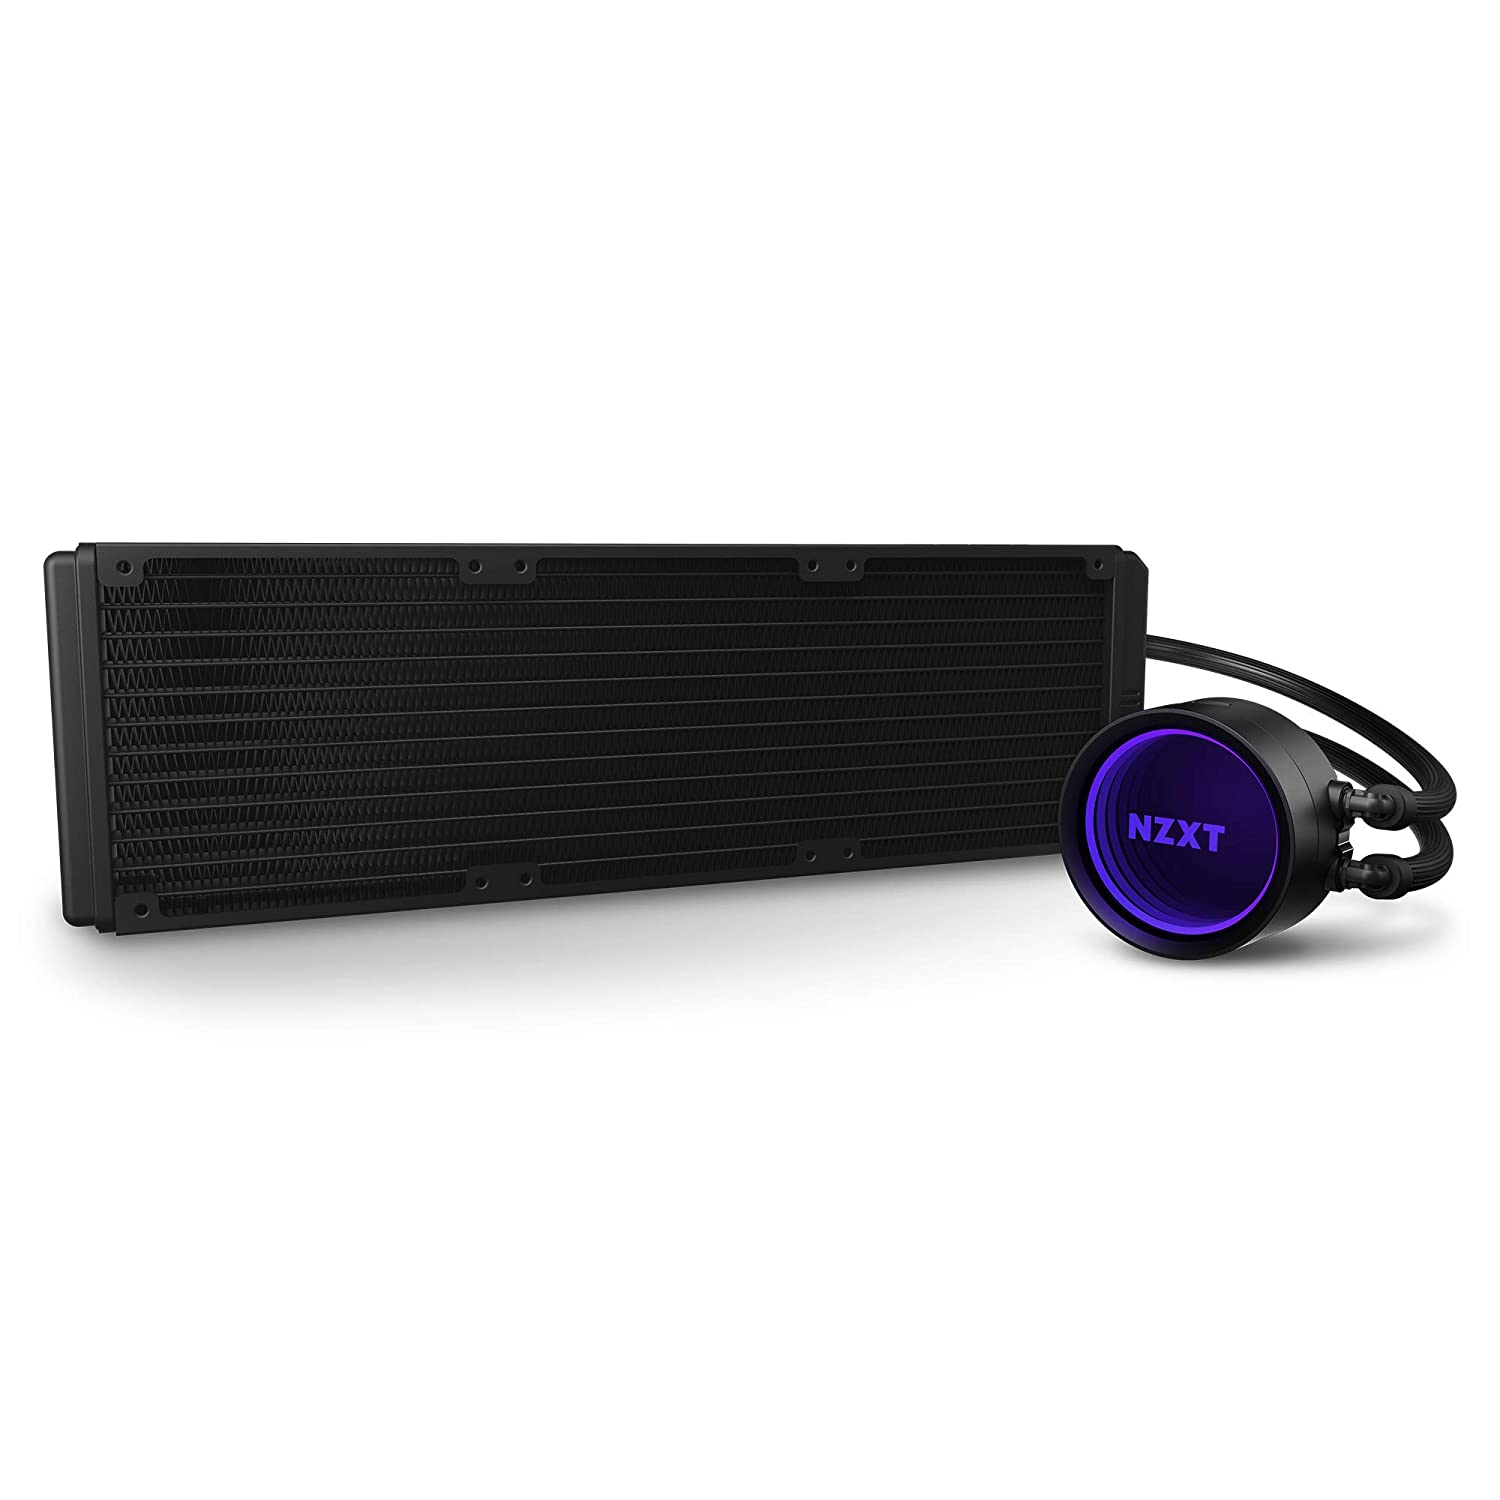 NZXT Kraken X73 360mm - RL-KRX73-01 - AIO RGB CPU Liquid Cooler - Rotating Infinity Mirror Design - Improved Pump - Powered by CAM V4 - RGB Connector - AER P 120mm Radiator Fans (3 Included)